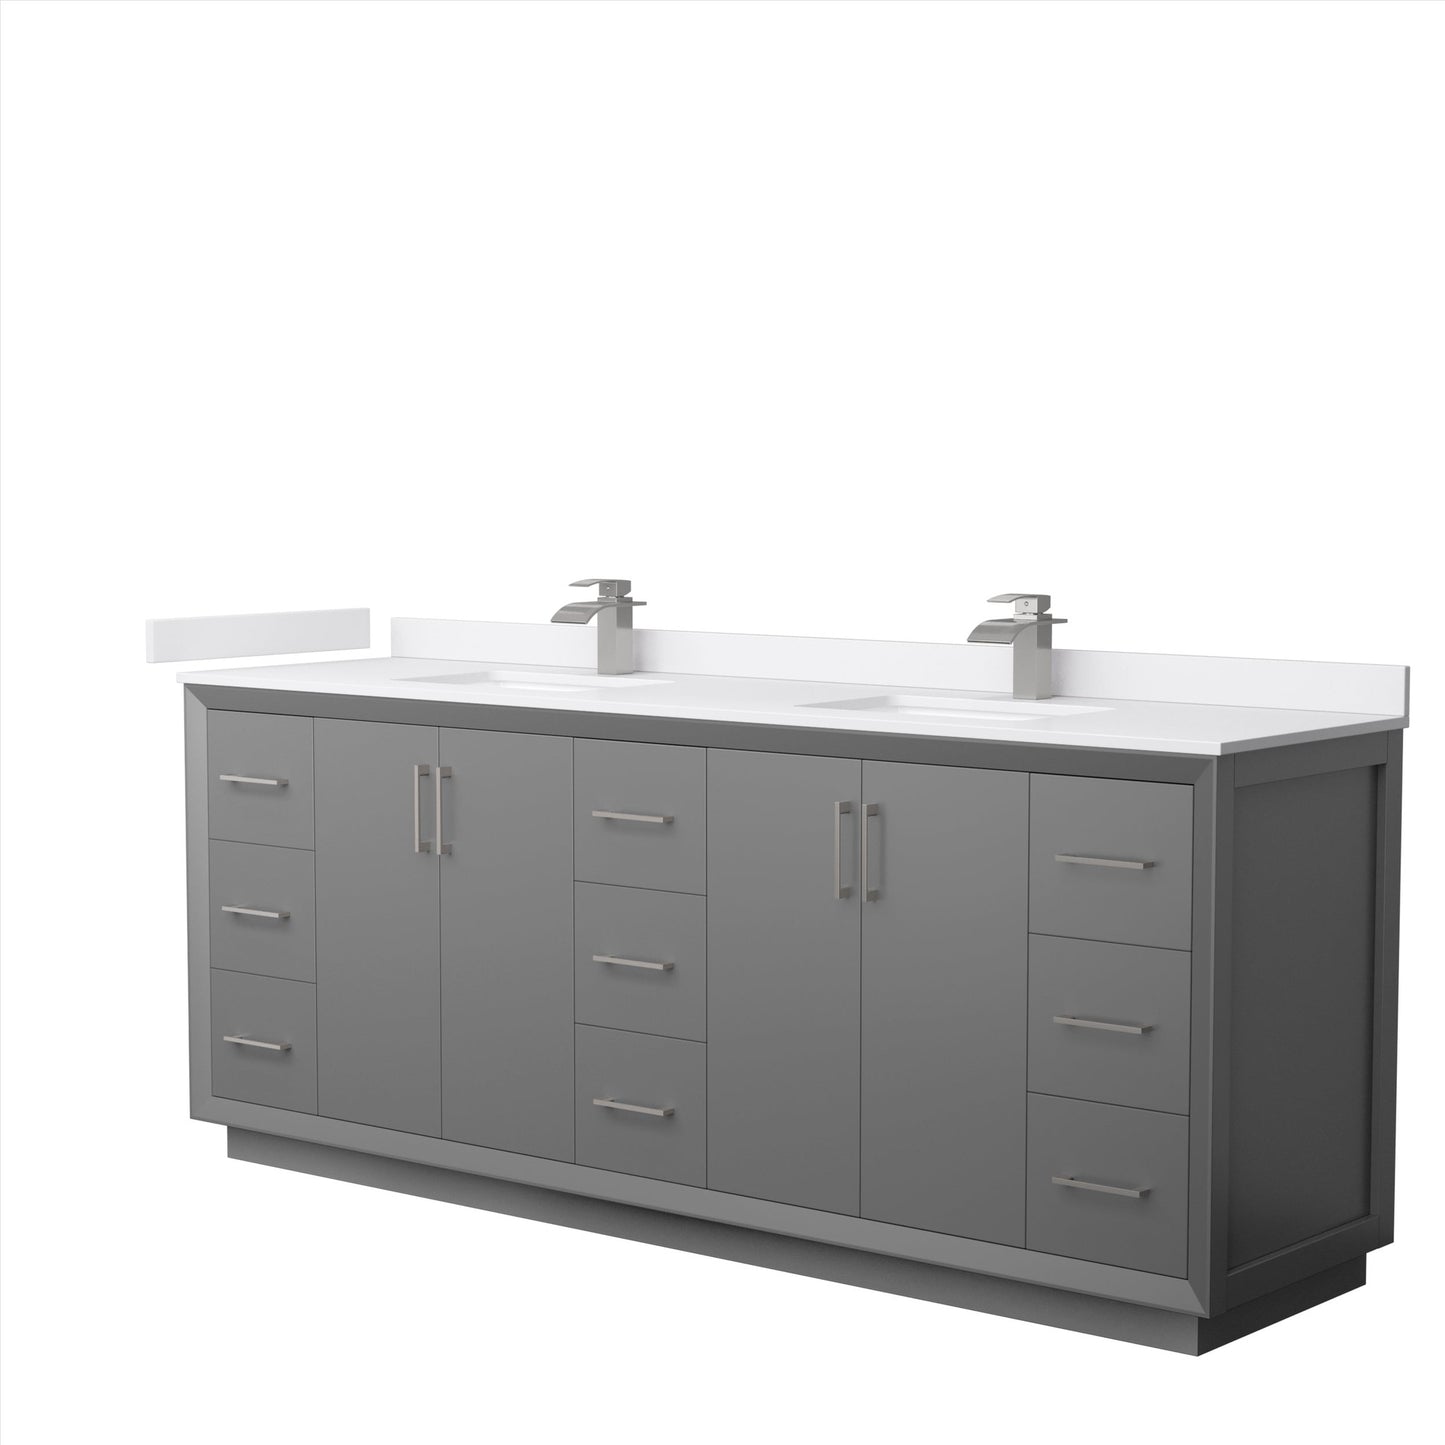 Wyndham Collection Strada 84" Double Bathroom Vanity in Dark Gray, White Cultured Marble Countertop, Undermount Square Sink, Brushed Nickel Trim